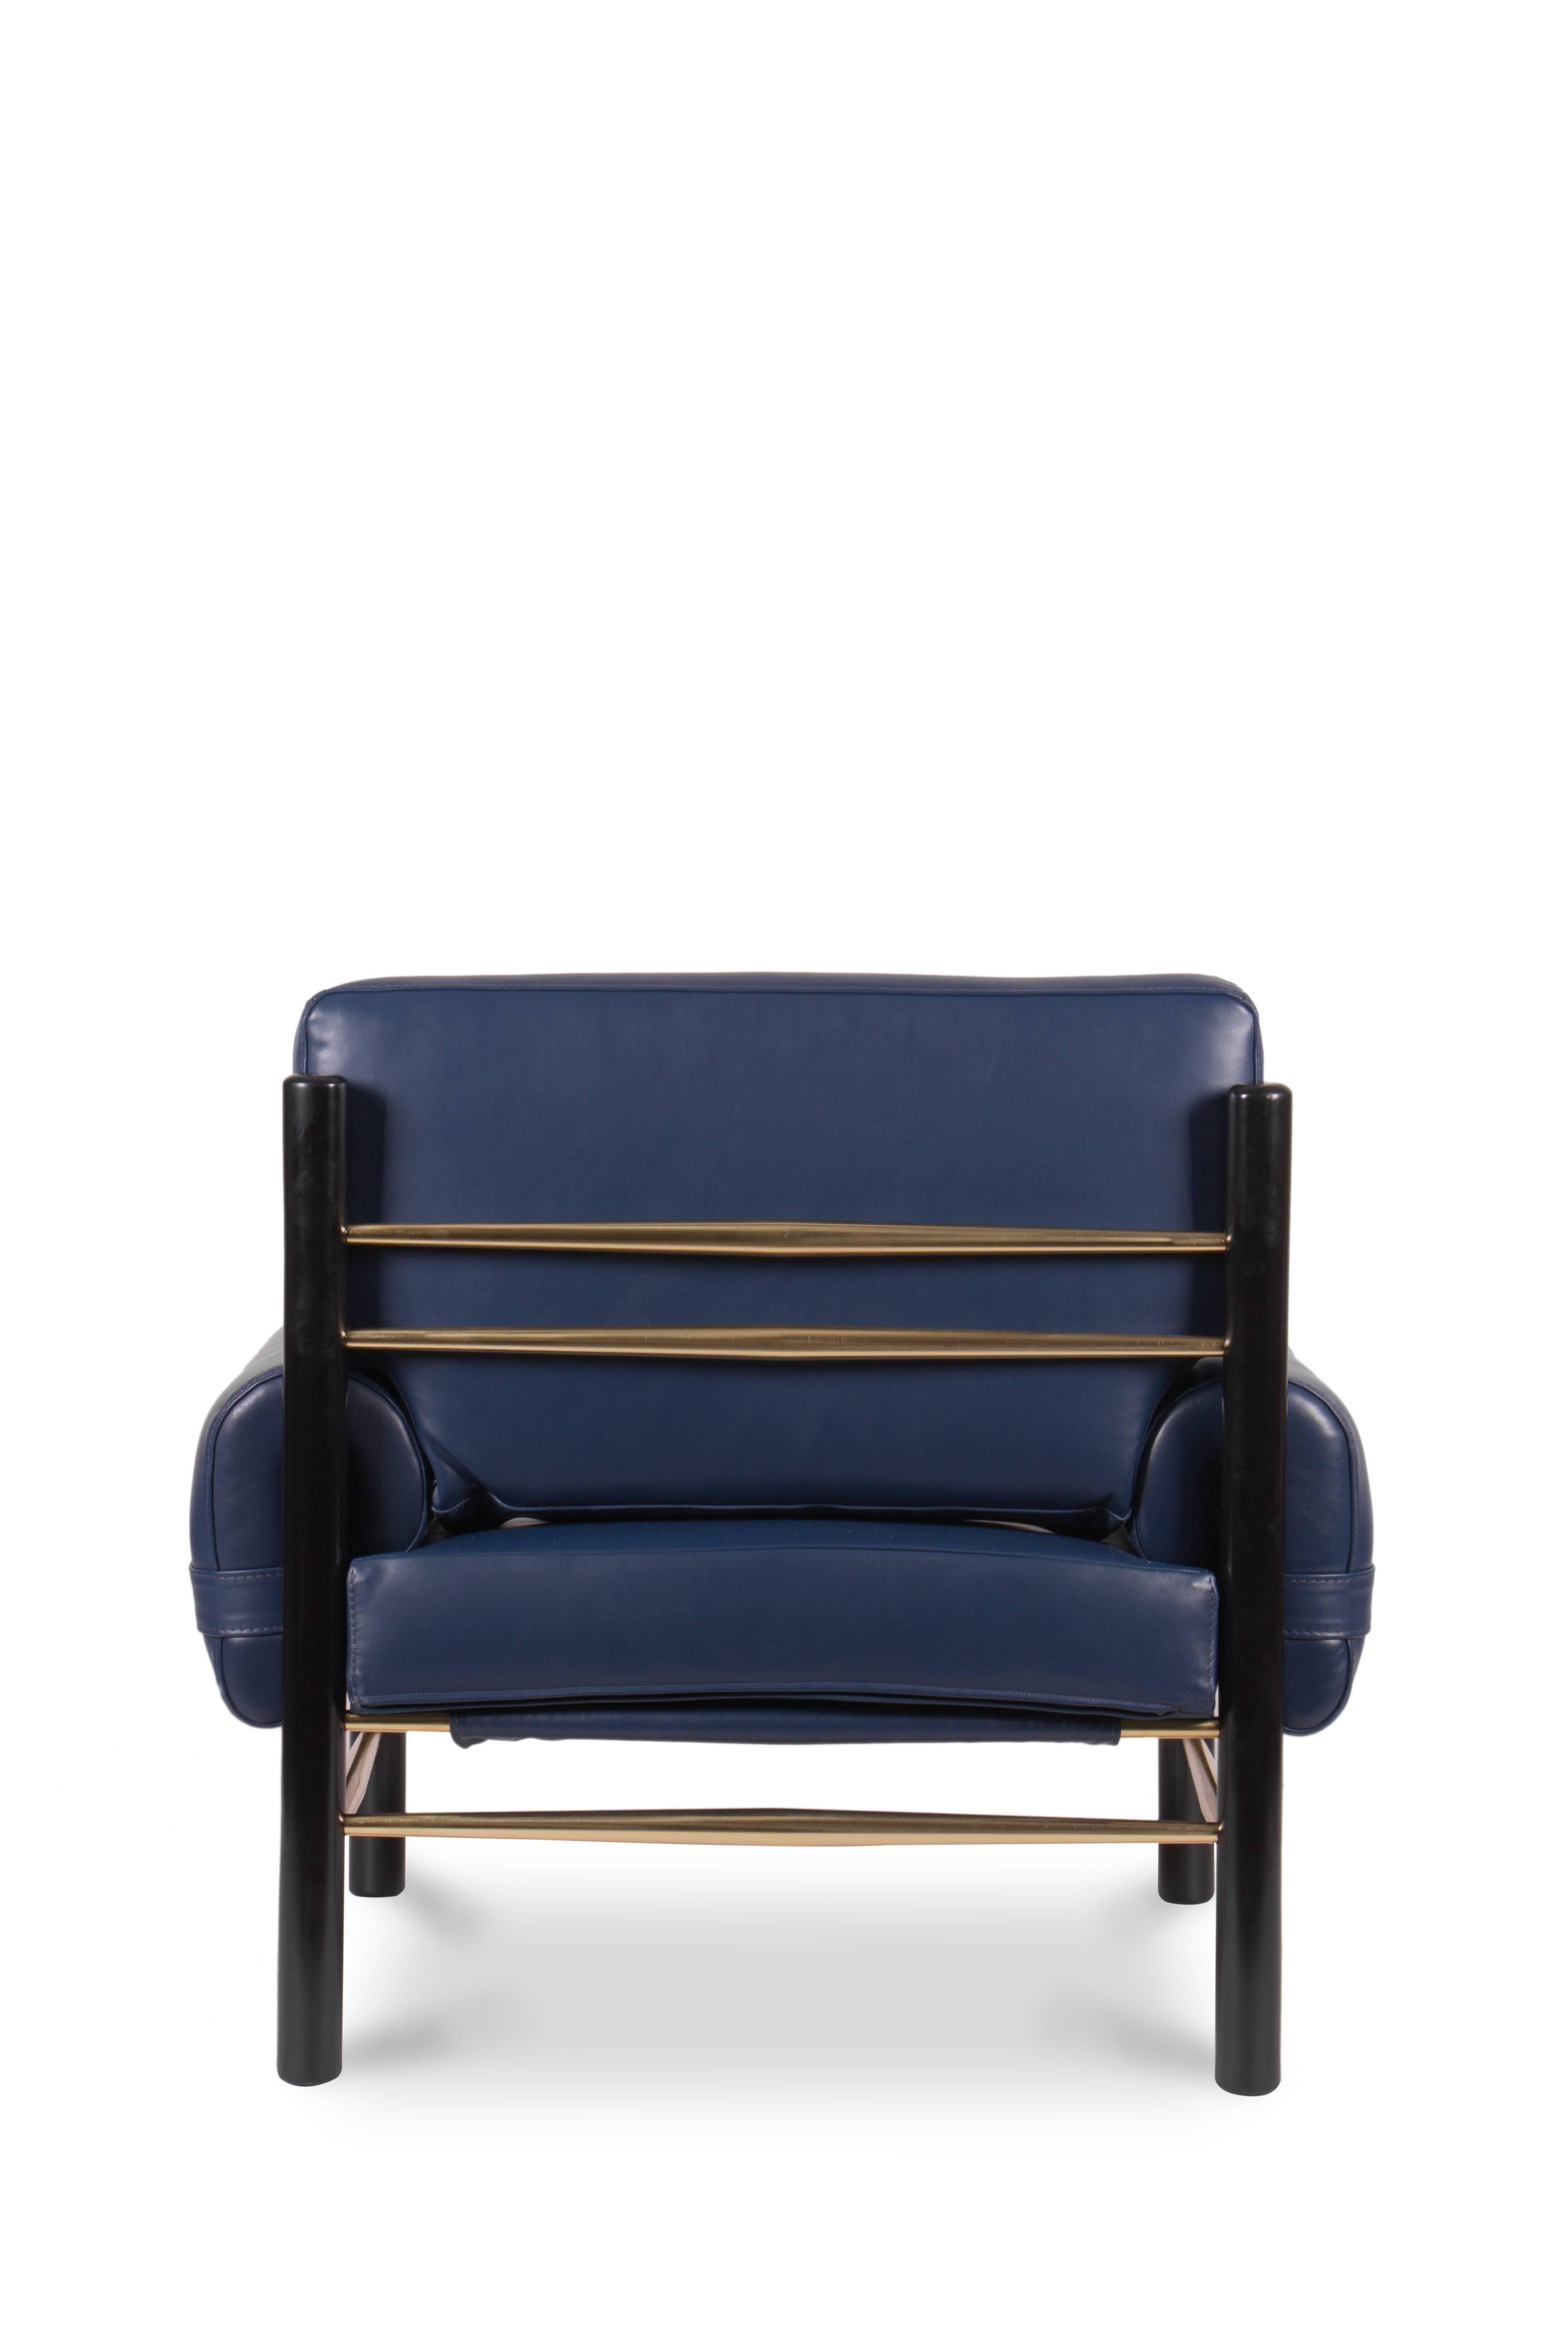 Lacquered Mid-Century Modern-Style Leather, Wood and Brass Boxy Armchair For Sale